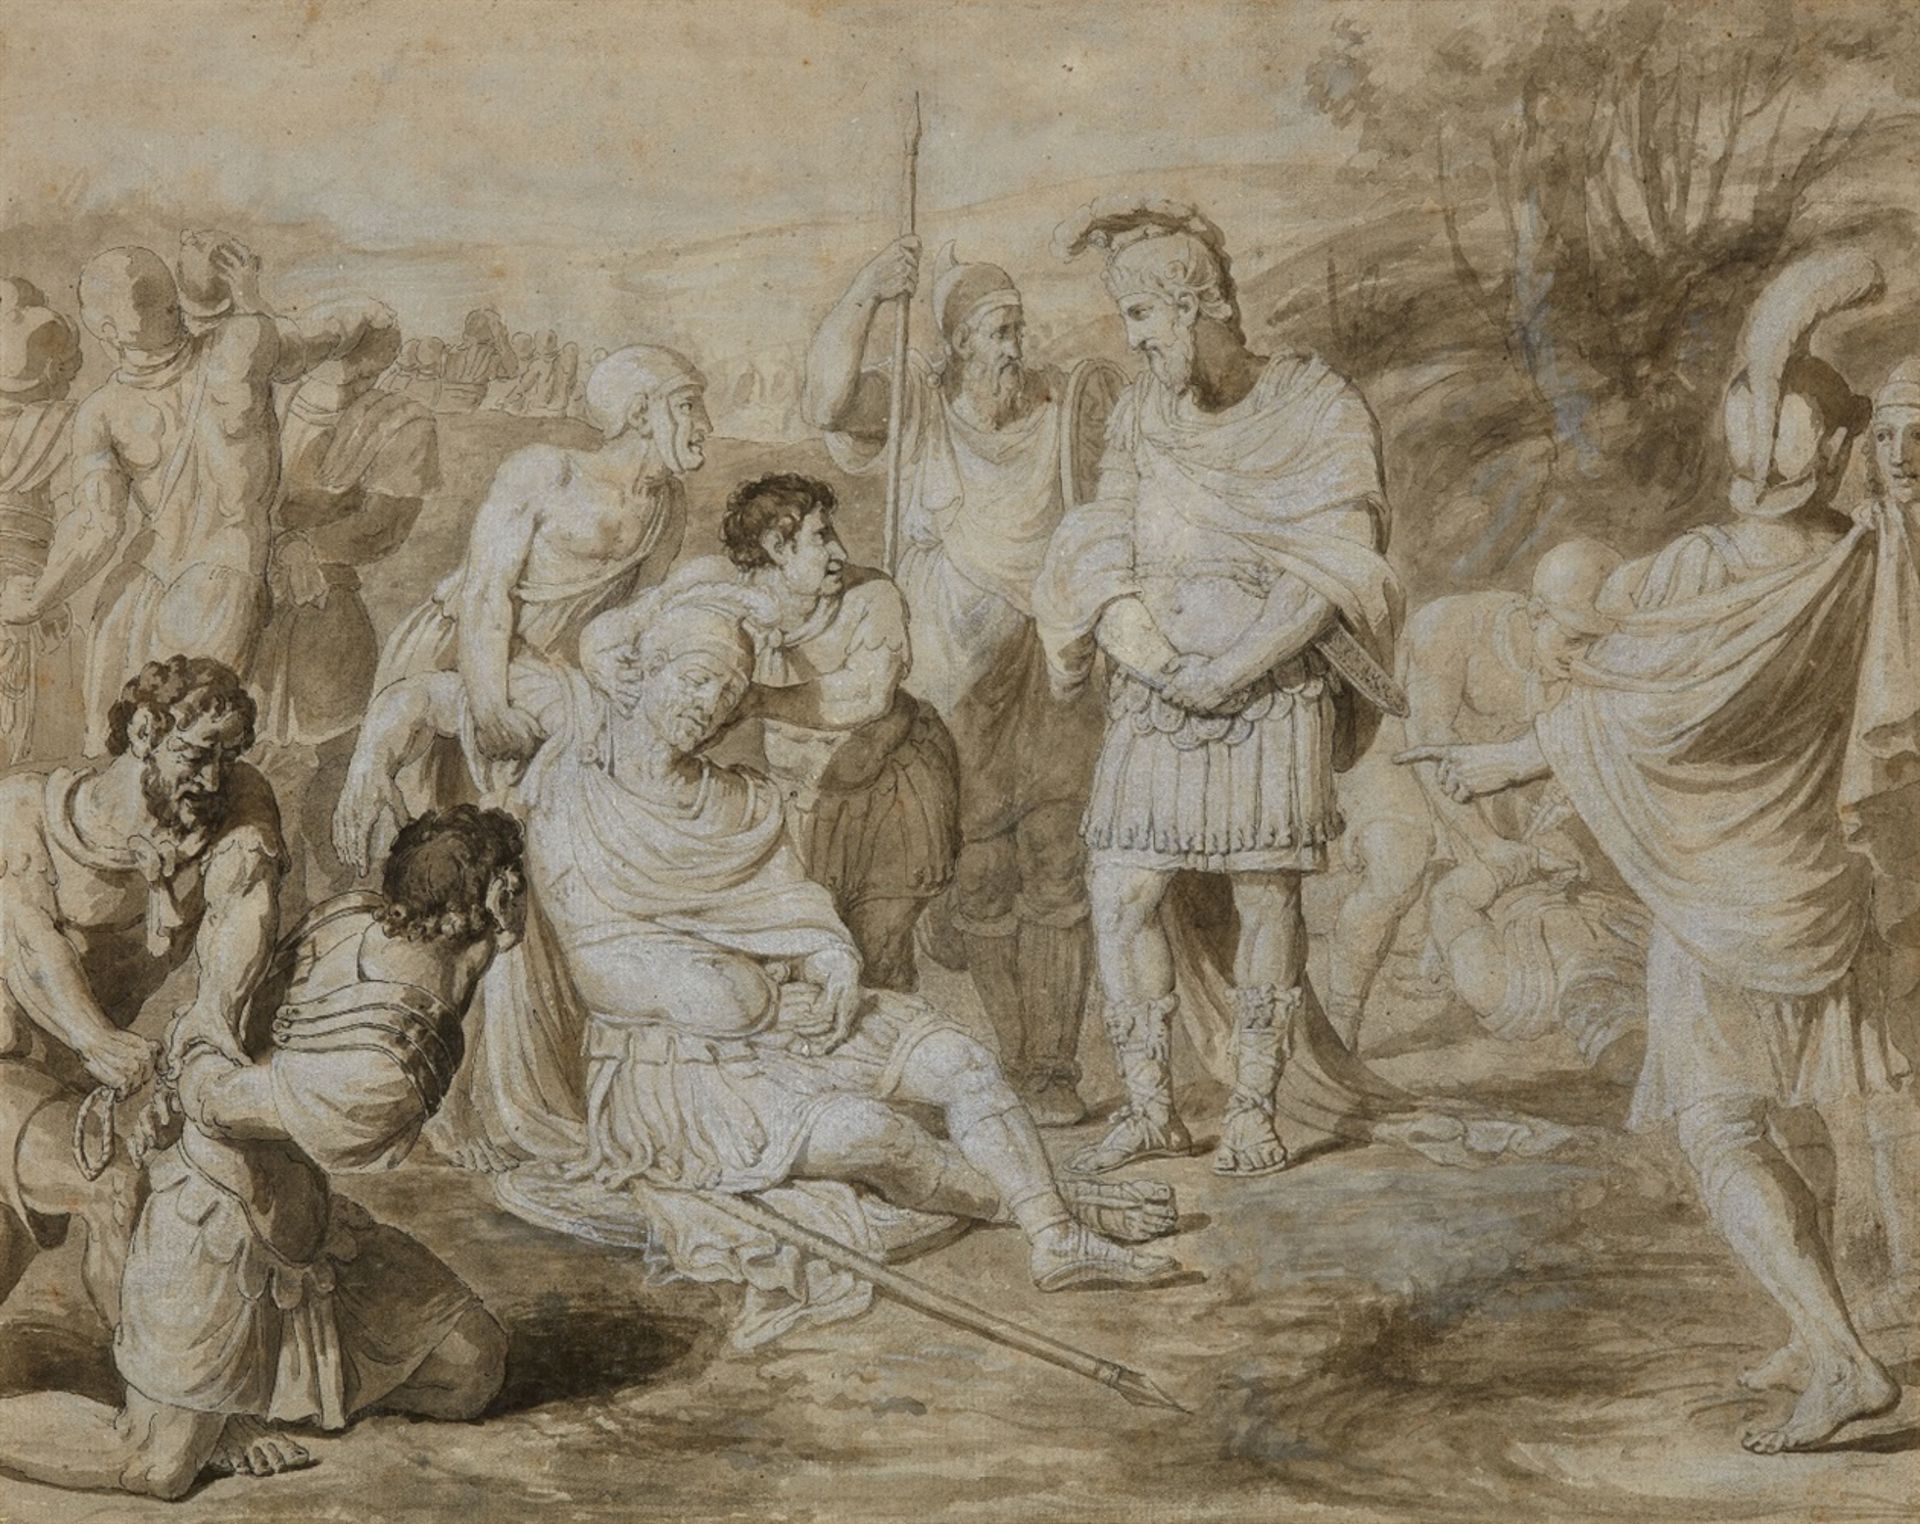 Luca Penni, attributed toScenes from a Story of AntiquityBrown ink and wash and white chalk on